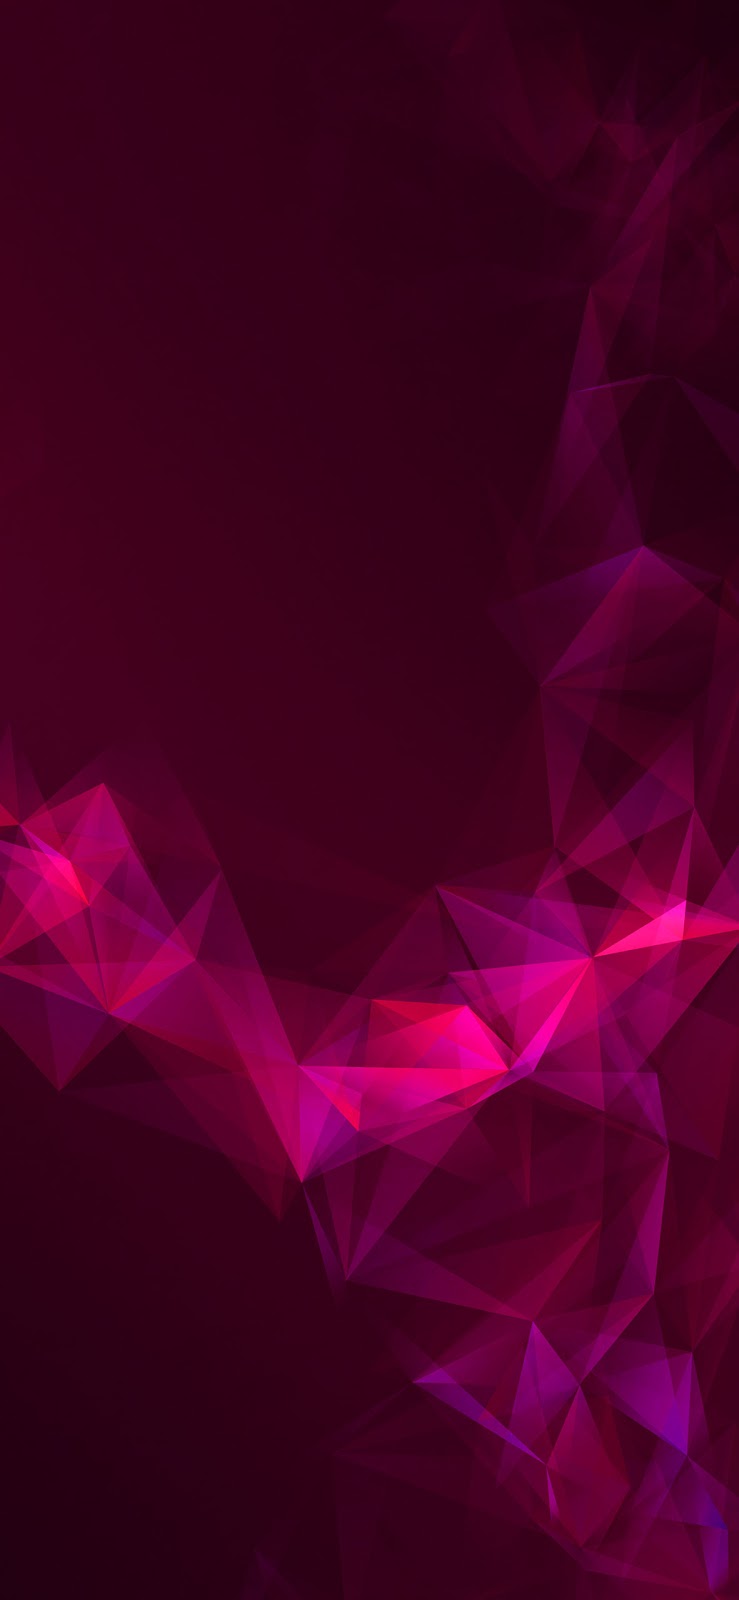 hd wallpapers free download,violet,pink,red,purple,magenta